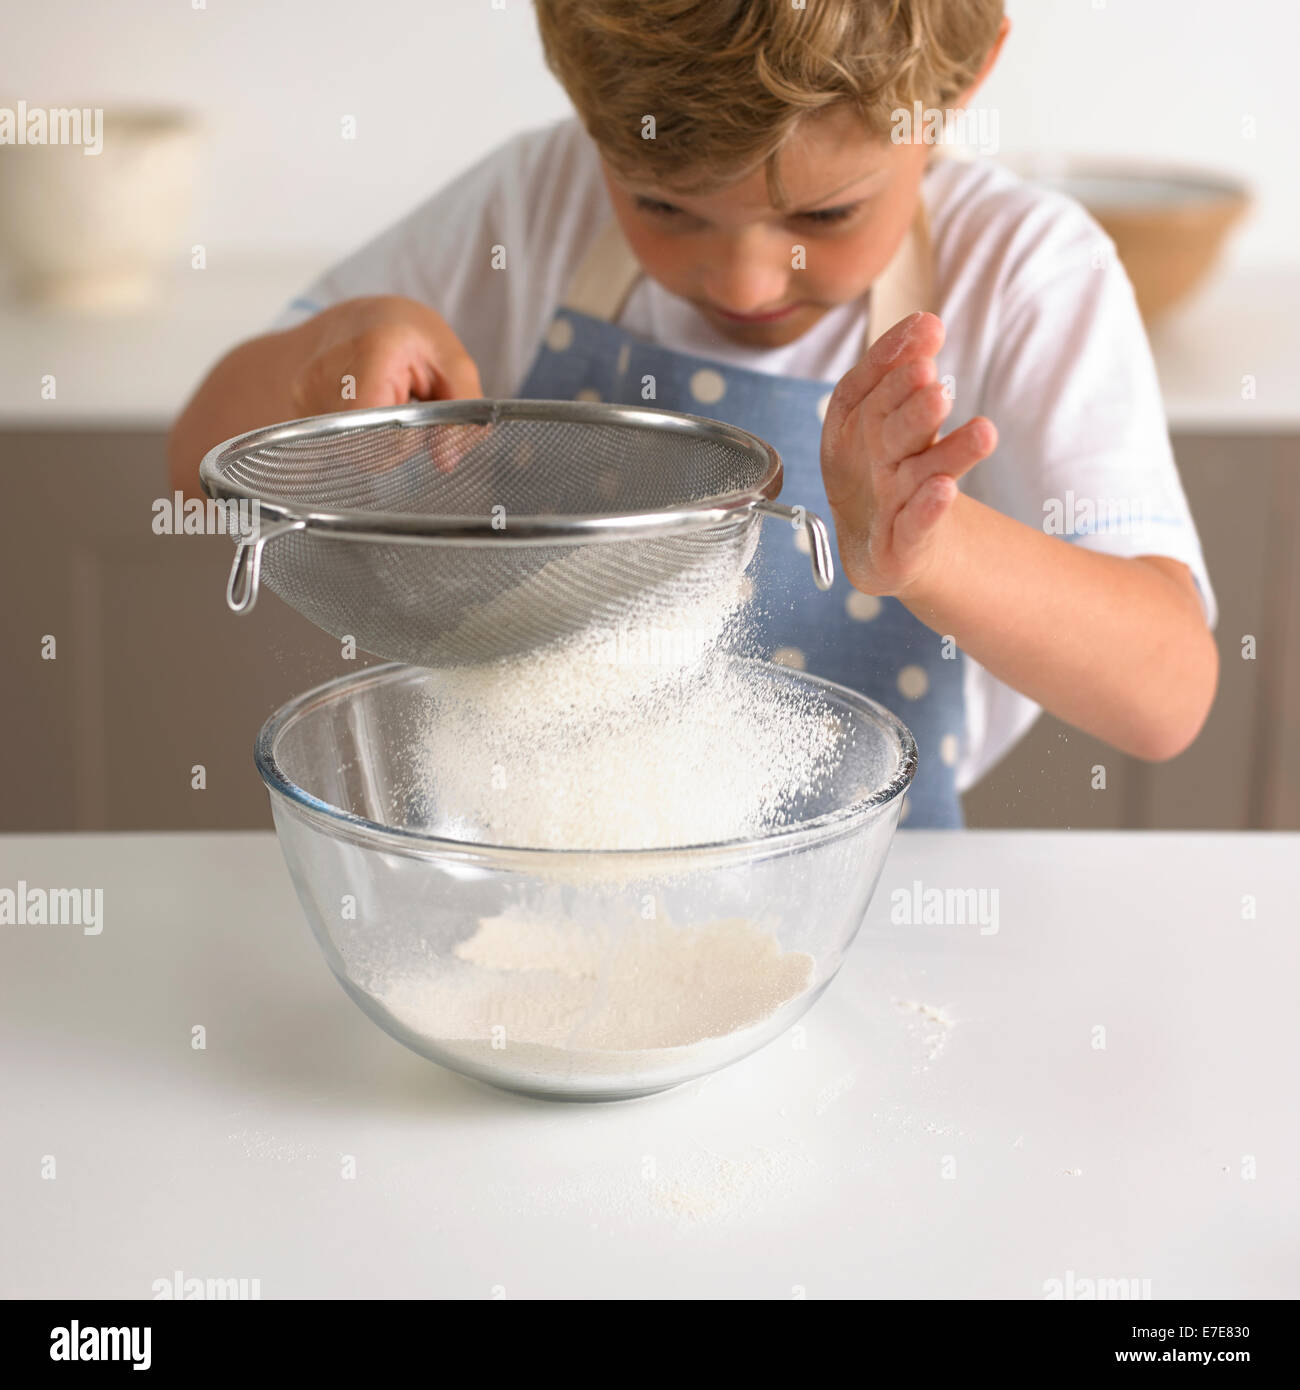 Image result for sifting flour